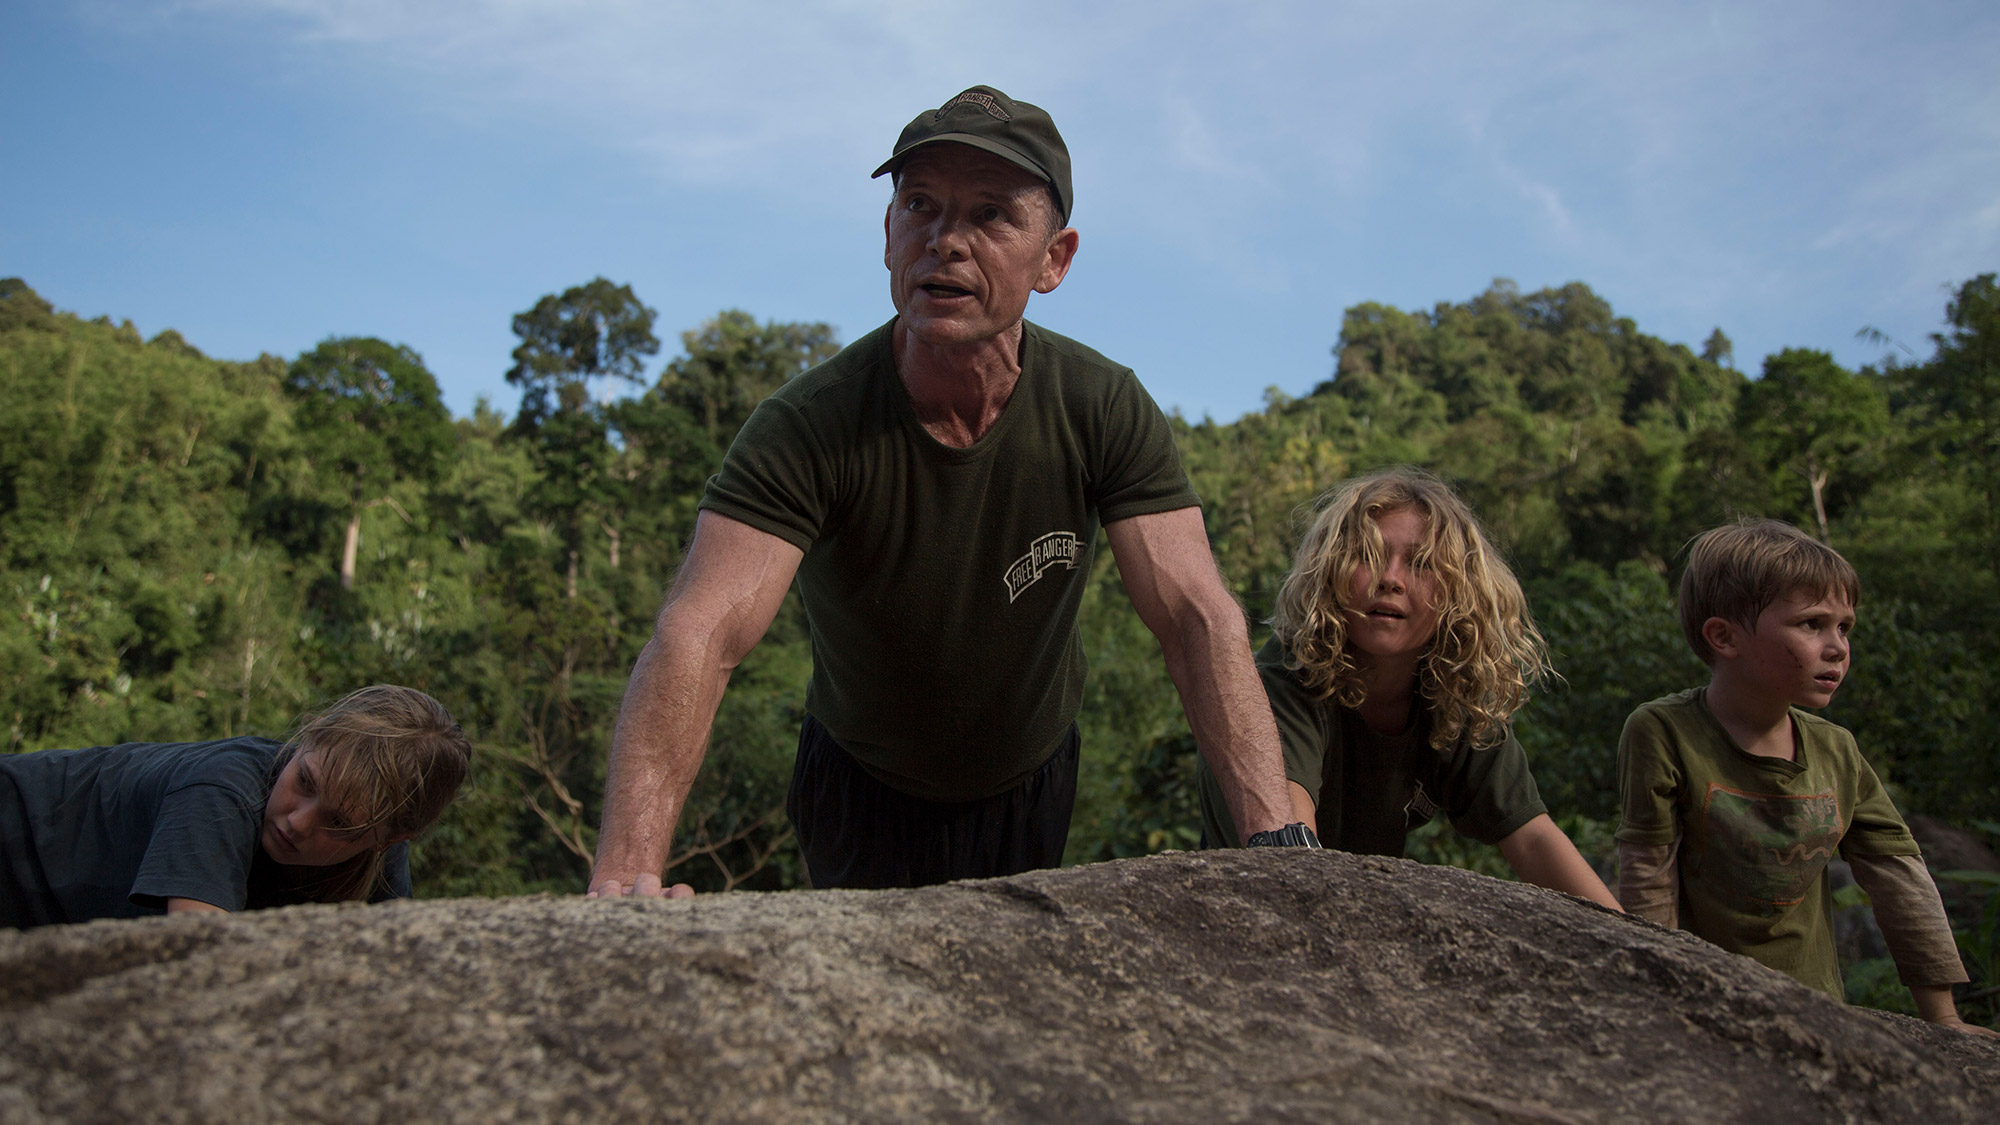 If God Called You to a War Zone, Would You Go?  A Review of “Free Burma Rangers”